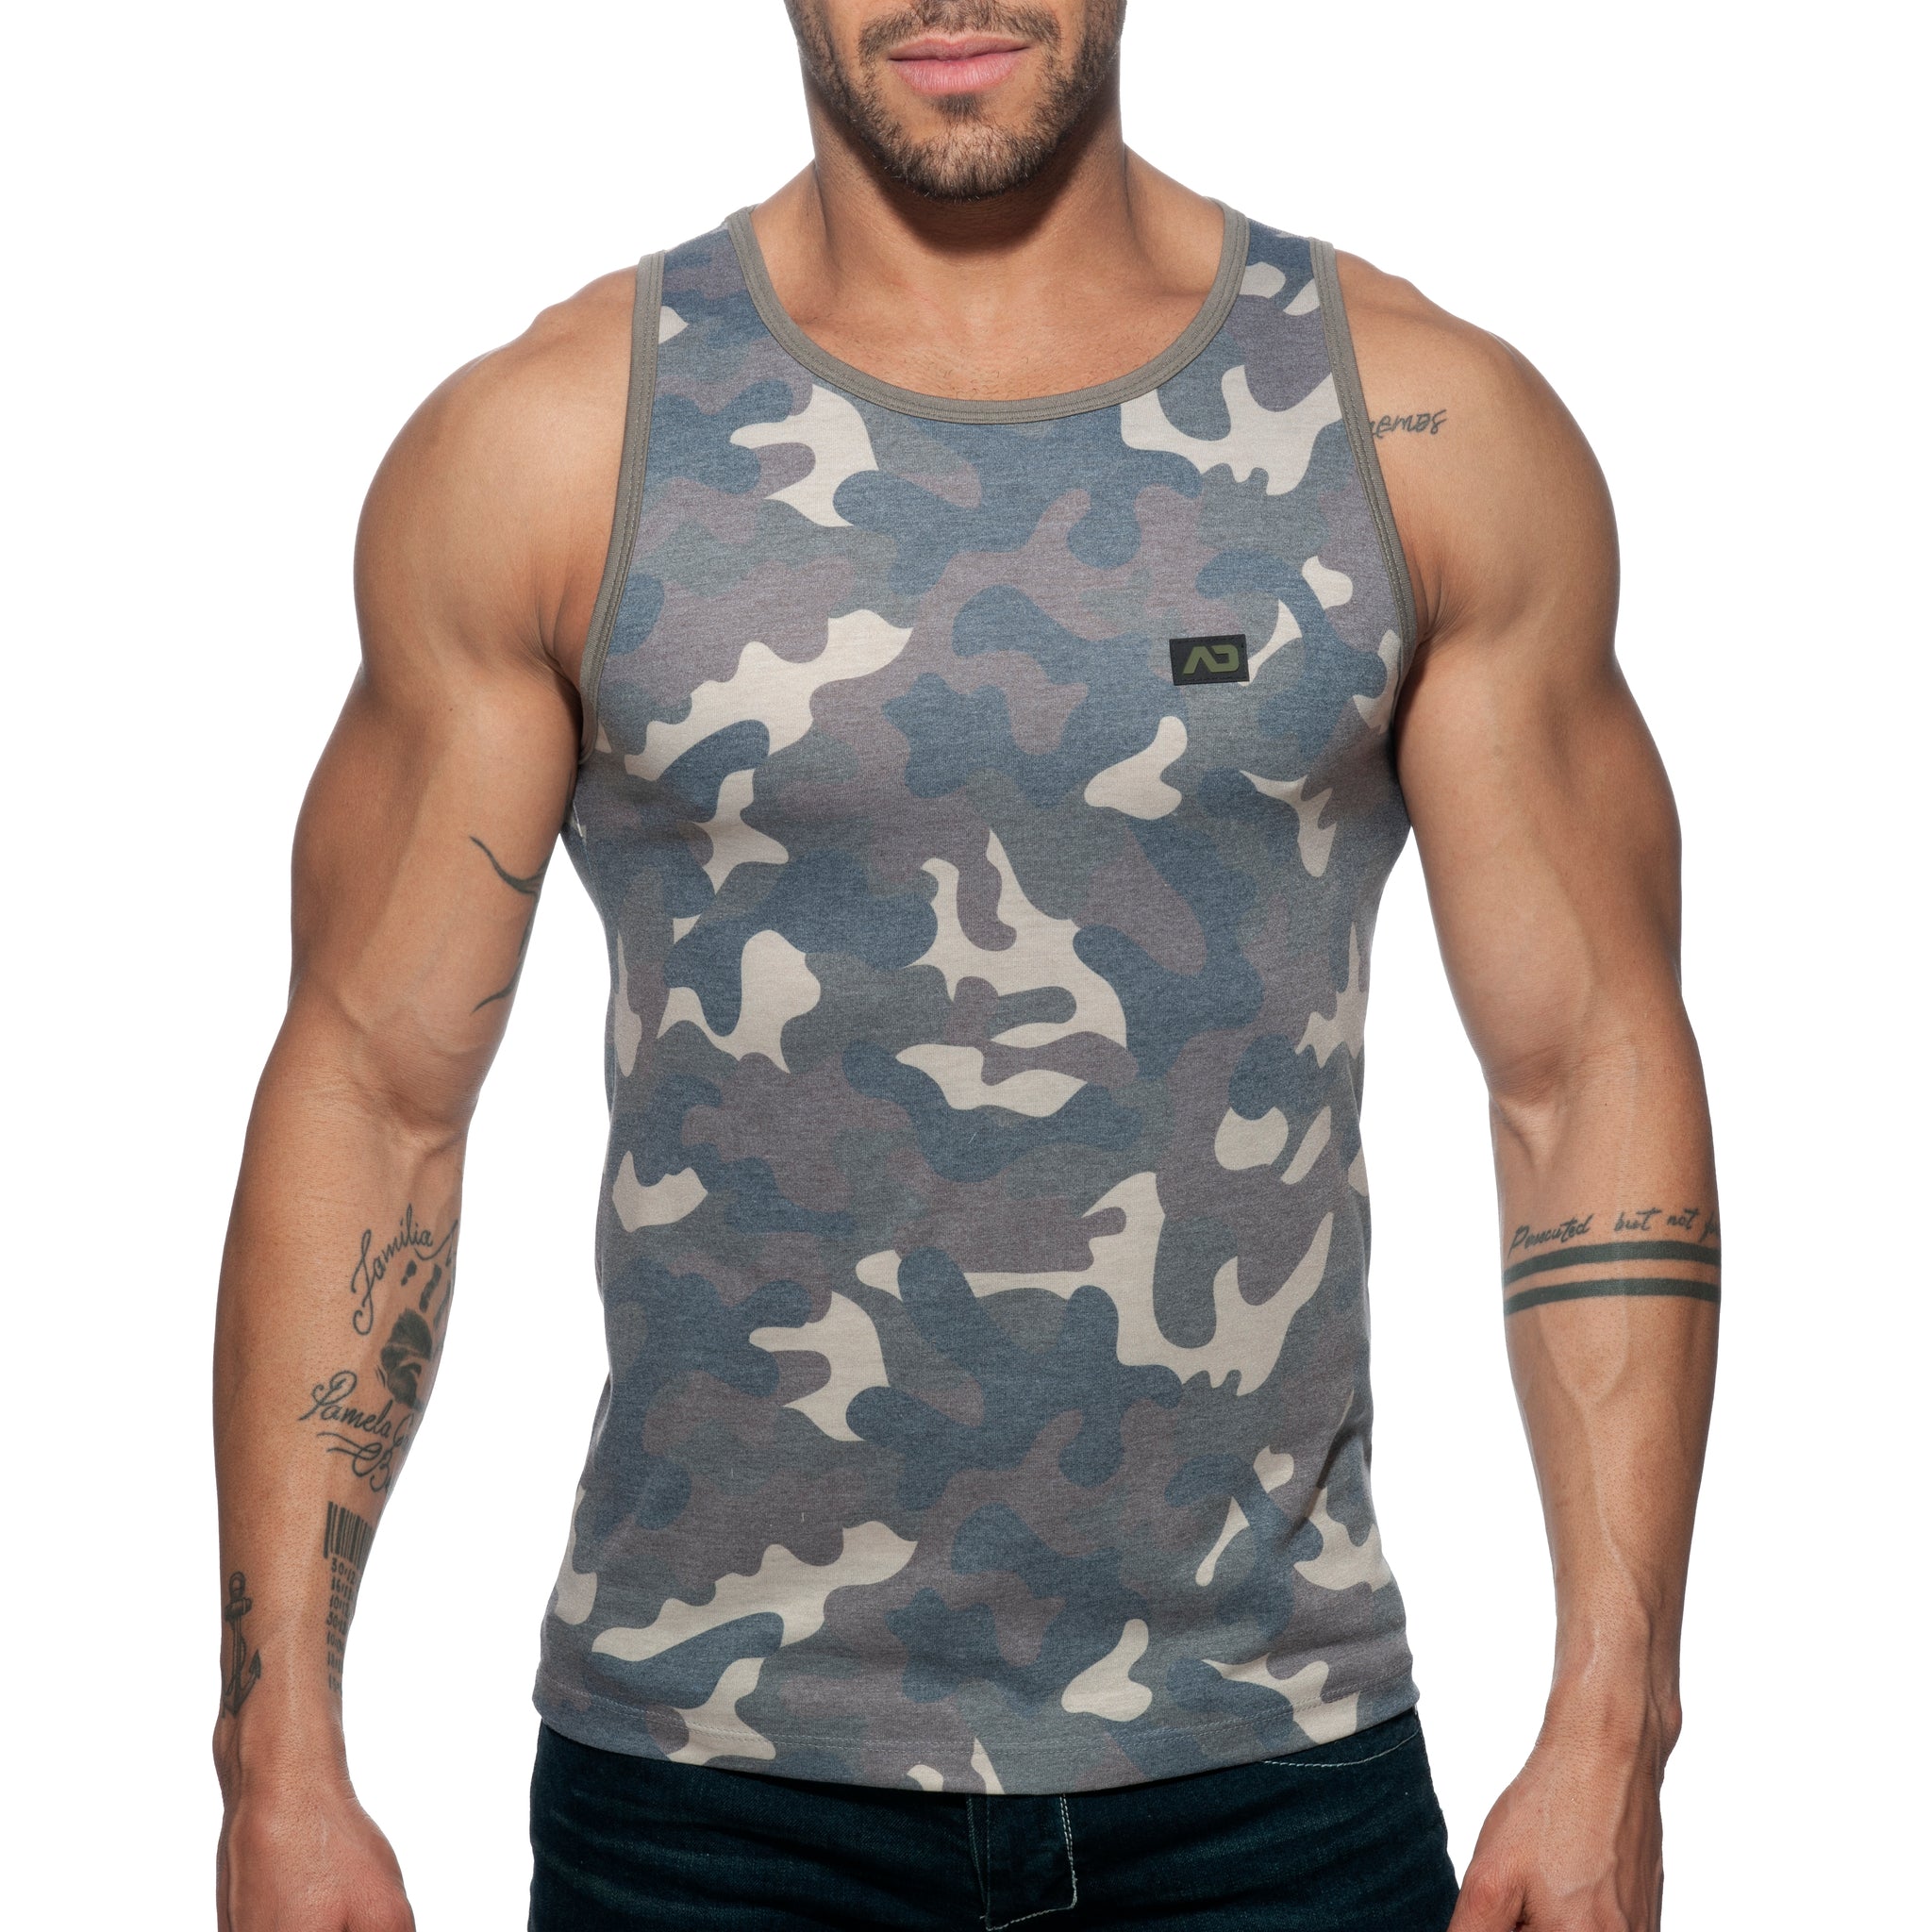 Addicted Washed Camo Tank Top Camouflage AD801